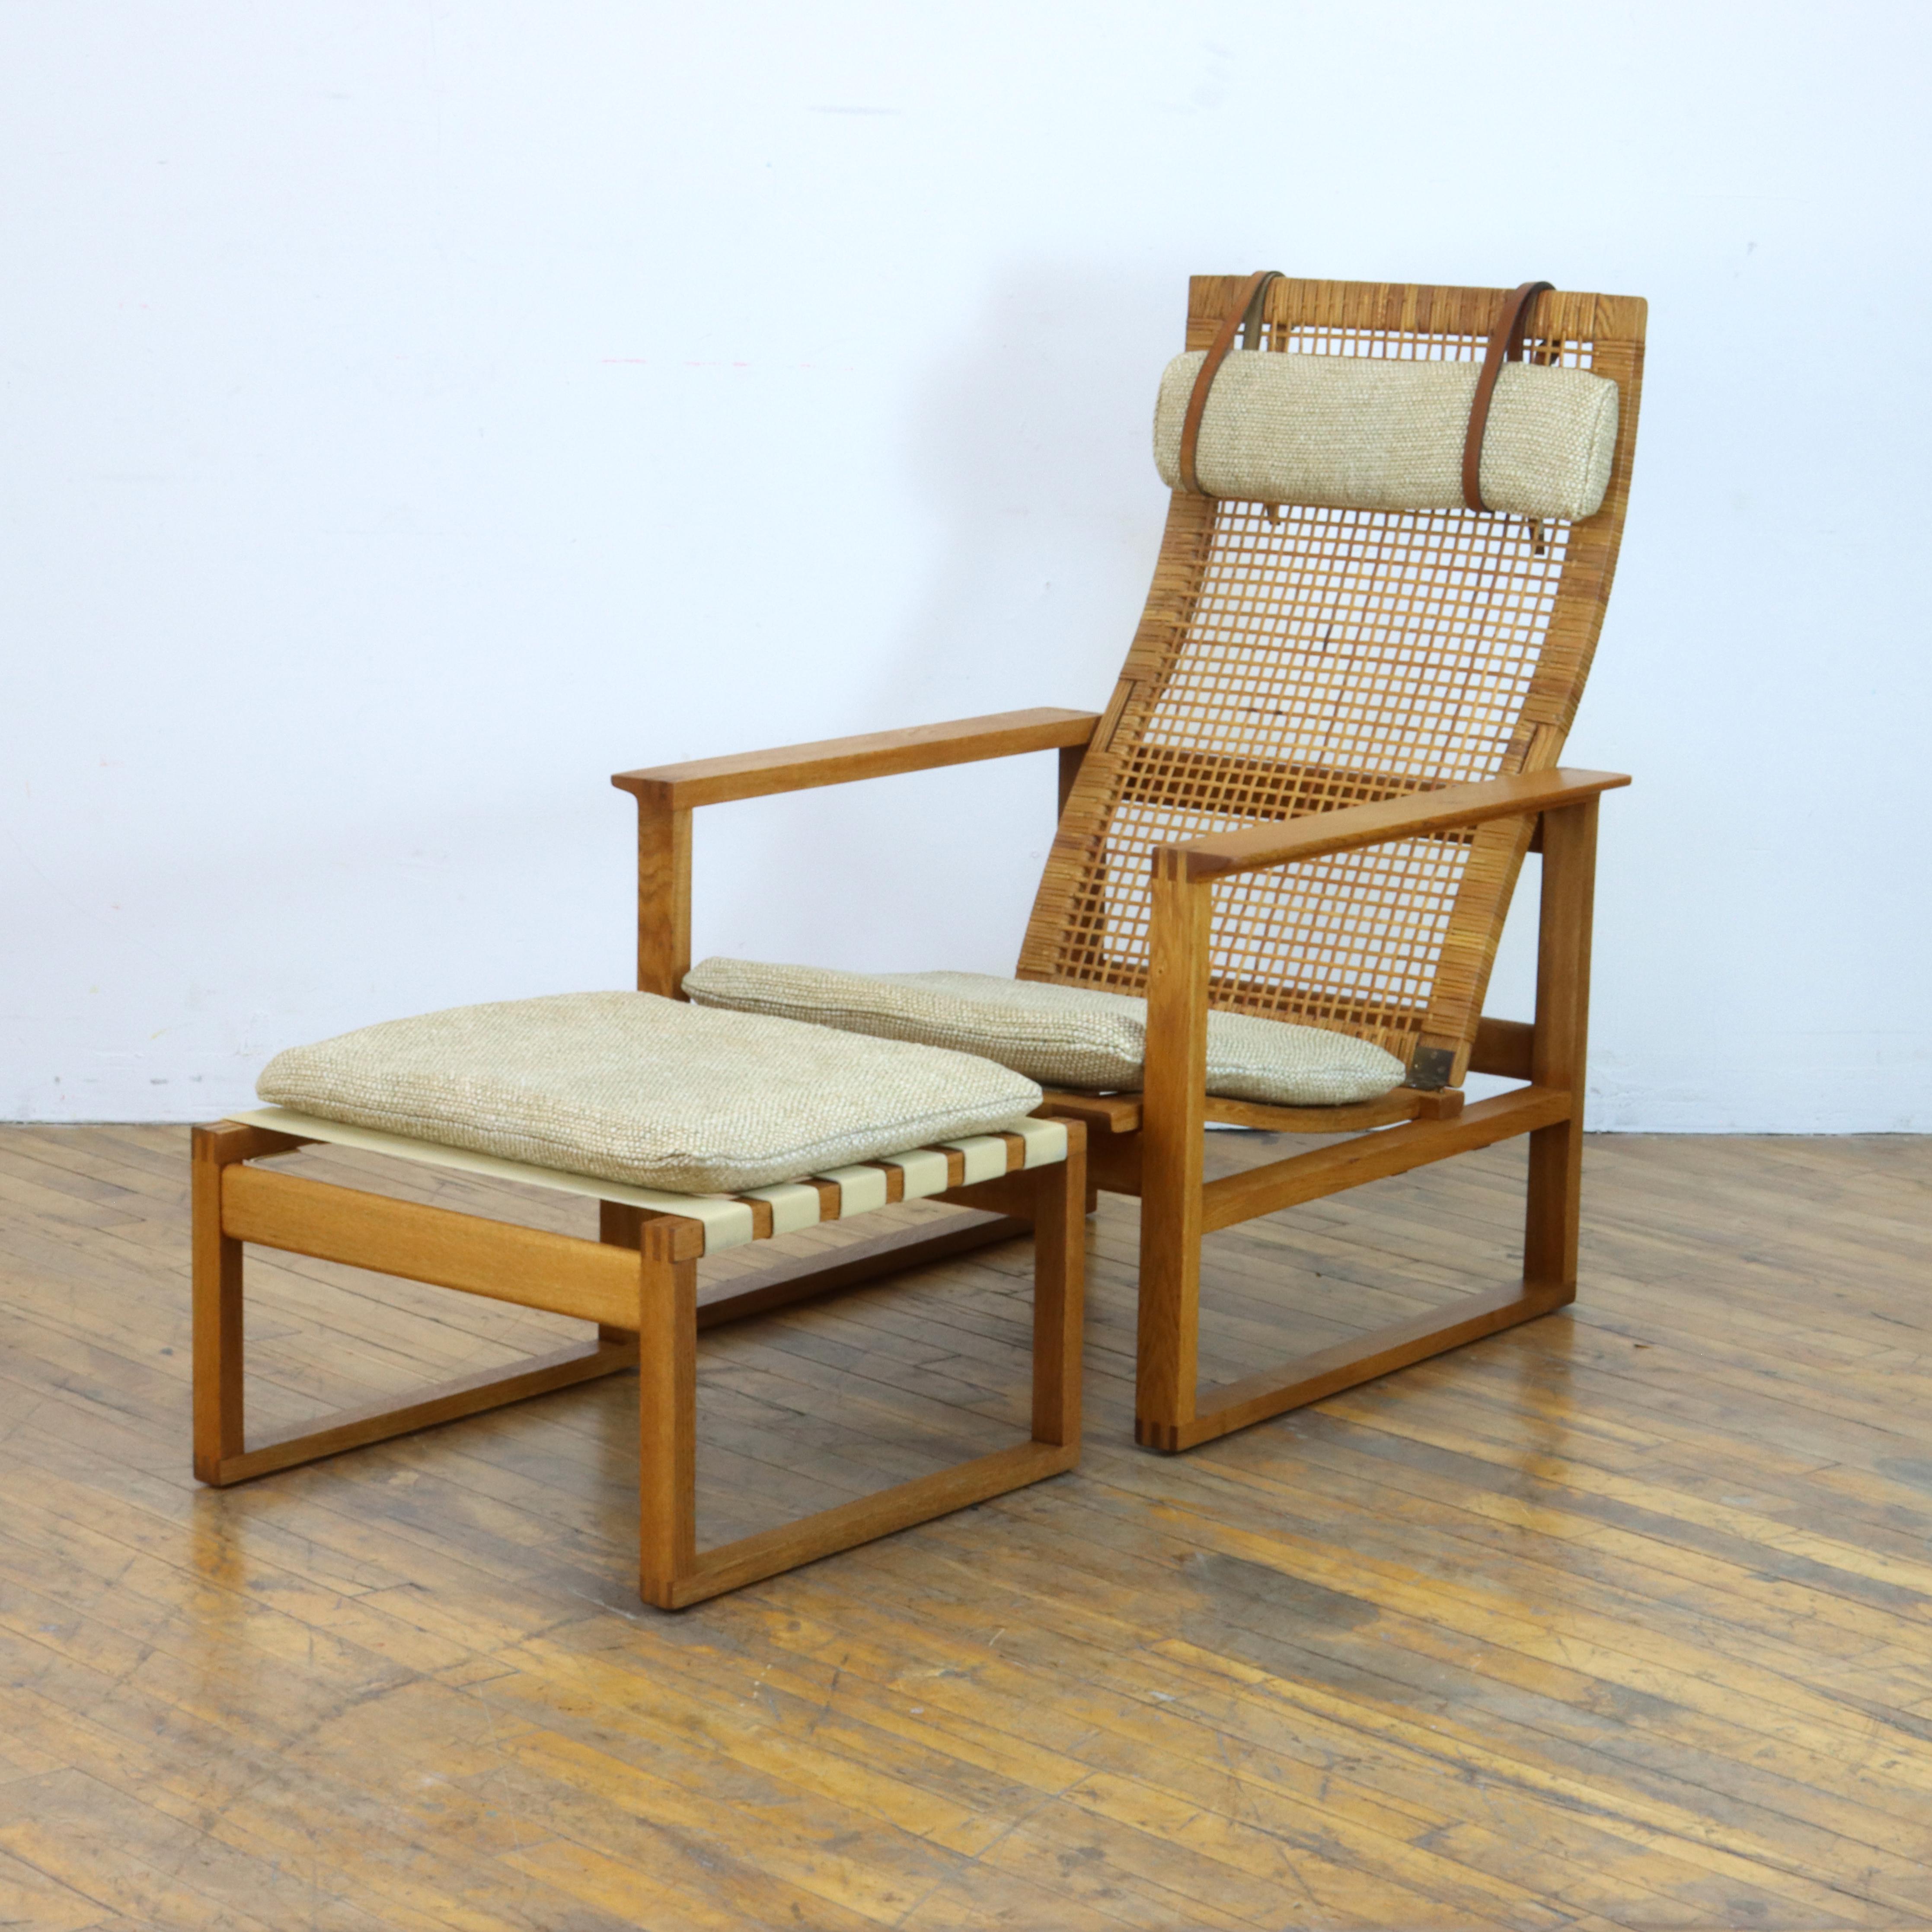 Vintage Børge Mogensen model 2254 reclining lounge chair and ottoman designed in 1954 for Fredericia Stolefabrik; this particular chair features the more unusual (and quite lovely) woven cane back rest. The frame was refinished and new high quality